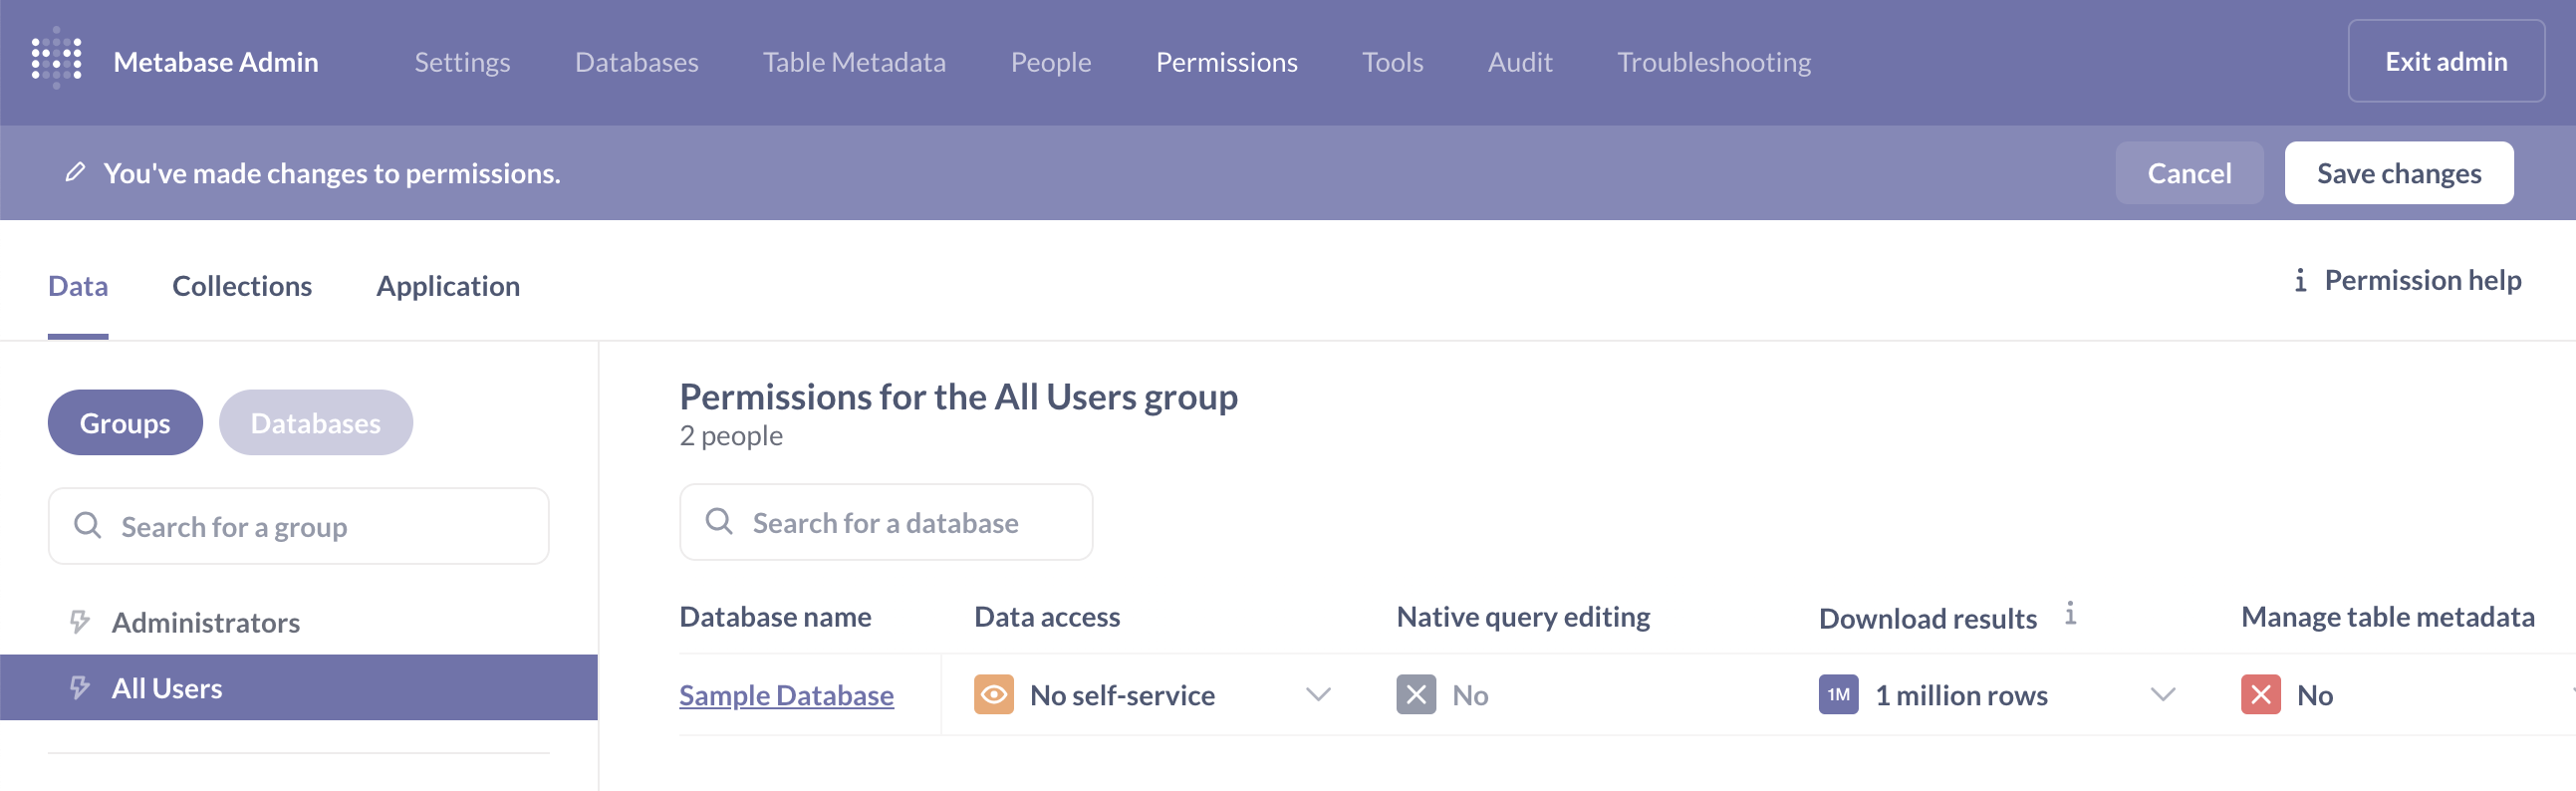 Resetting permissions of the All Users group to